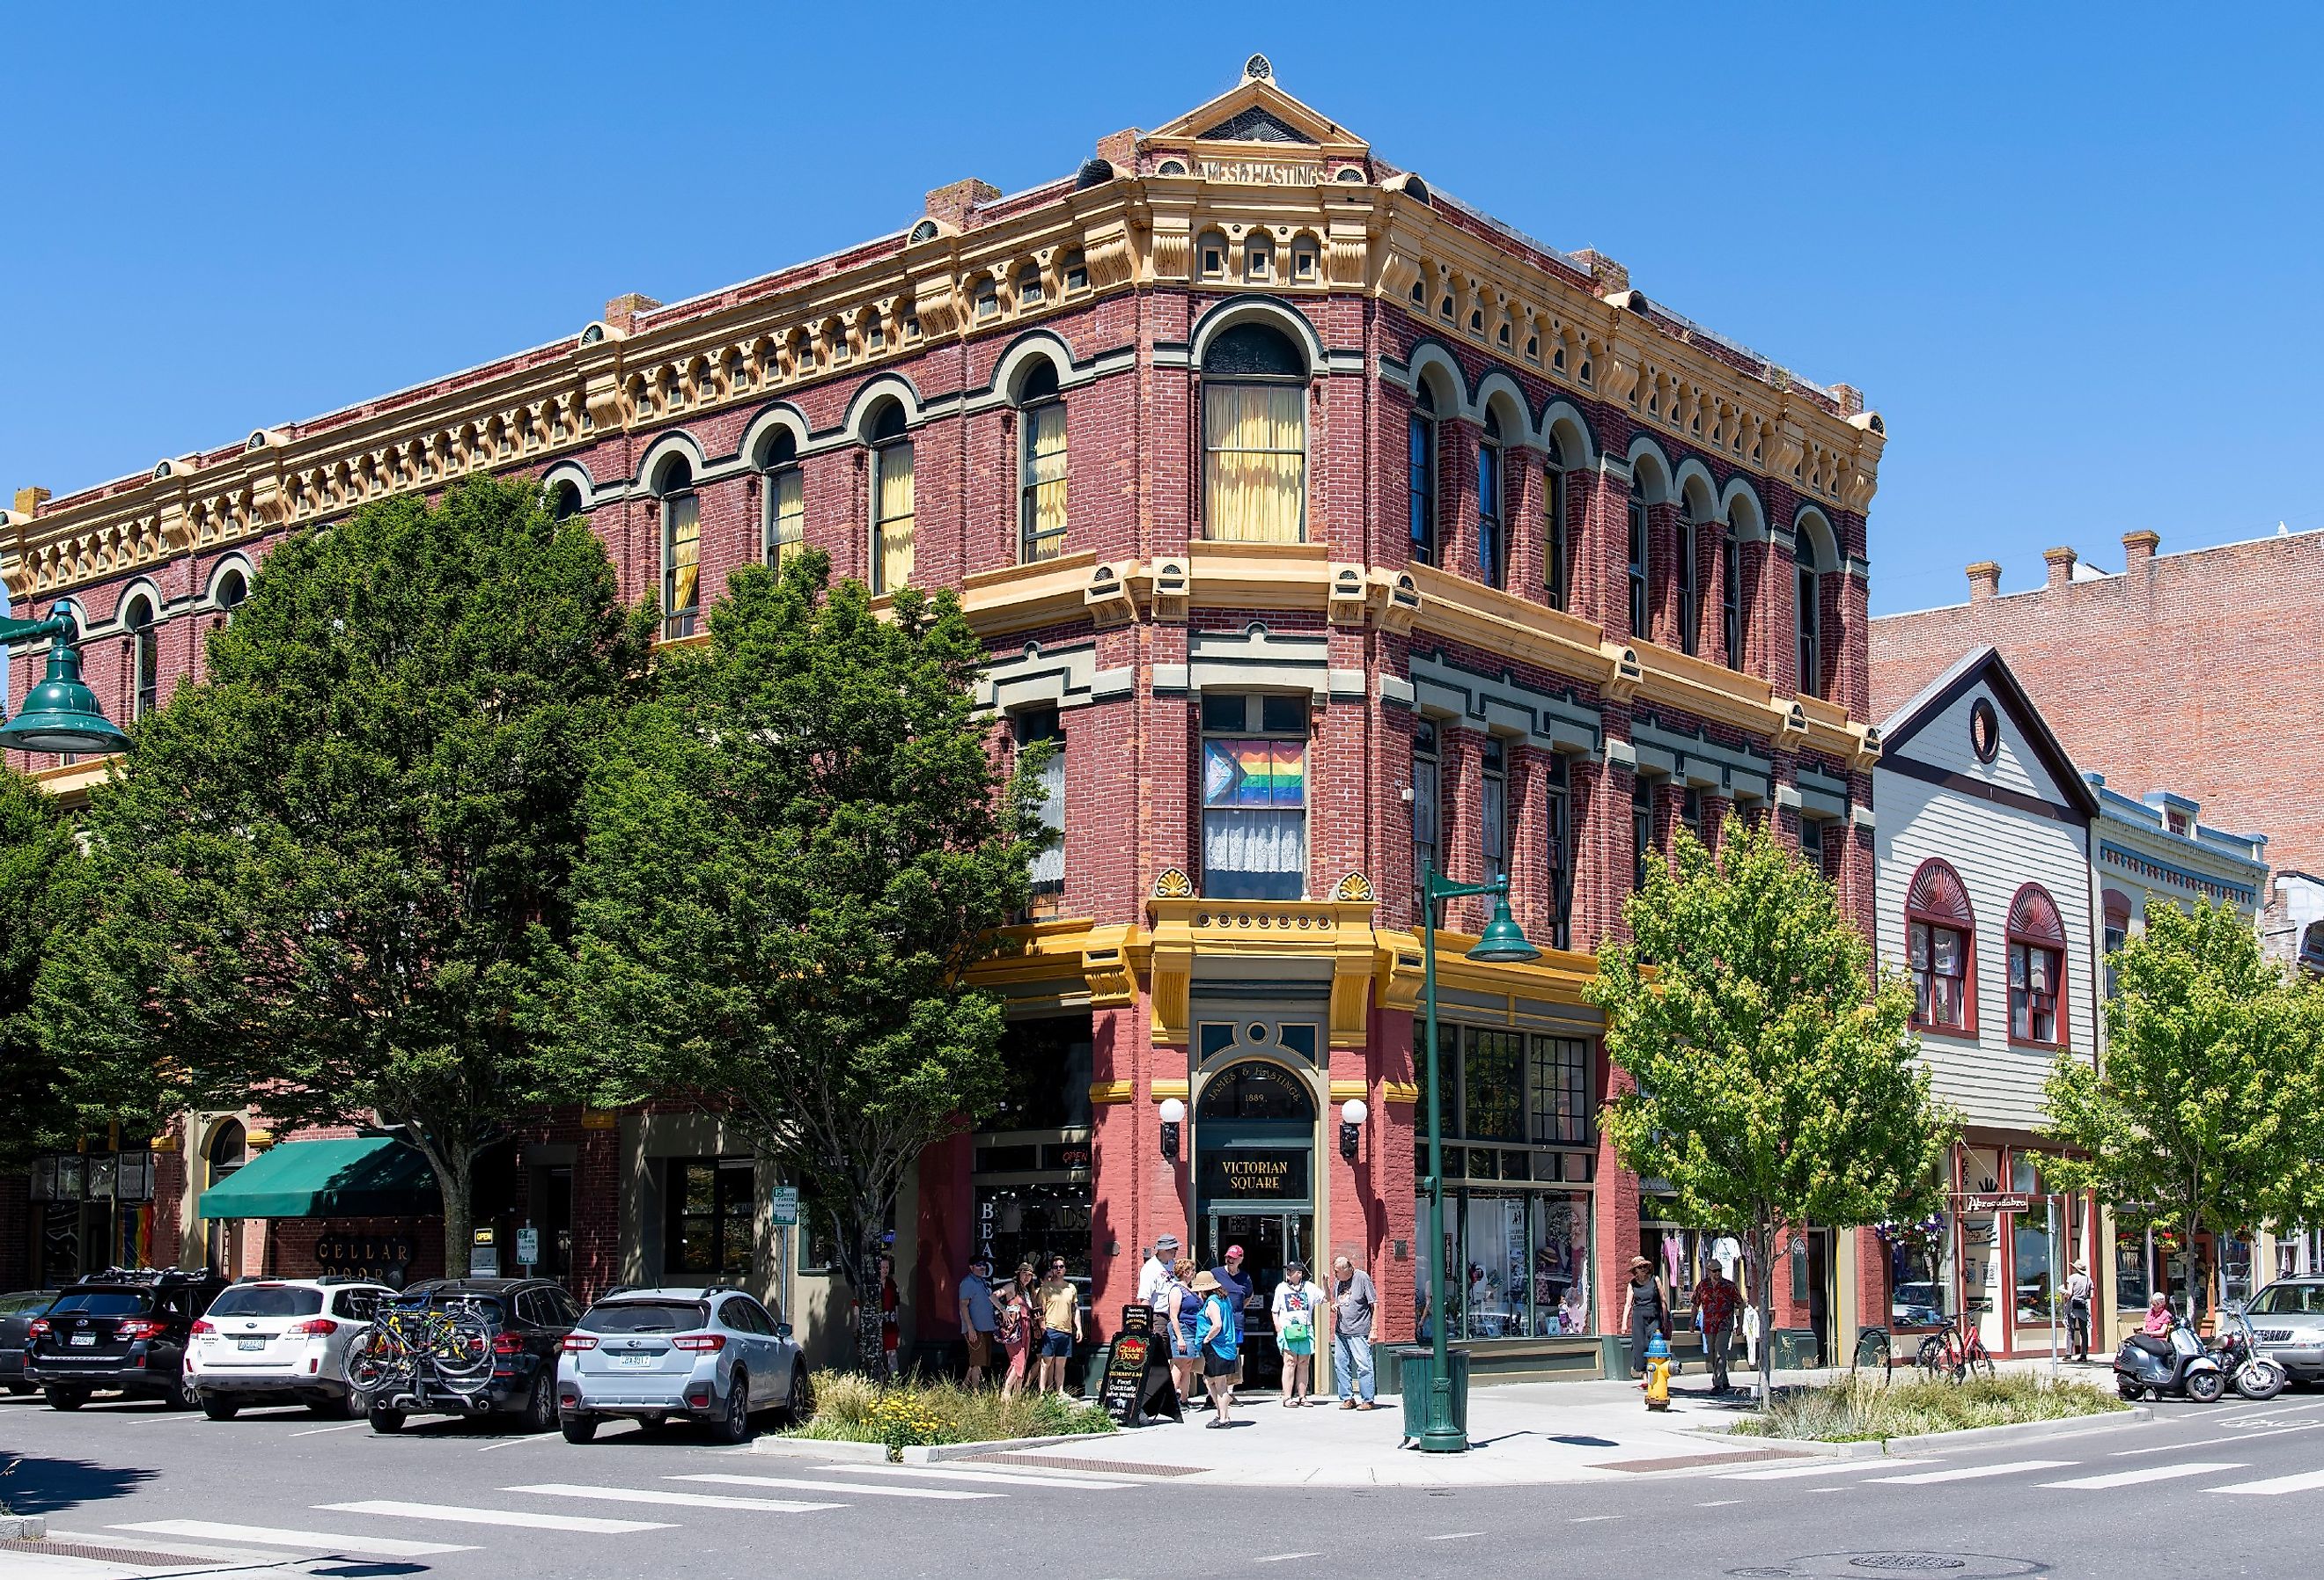 Downtown Water Street in Port Townsend Historic District. Image credit 365 Focus Photography via Shutterstock